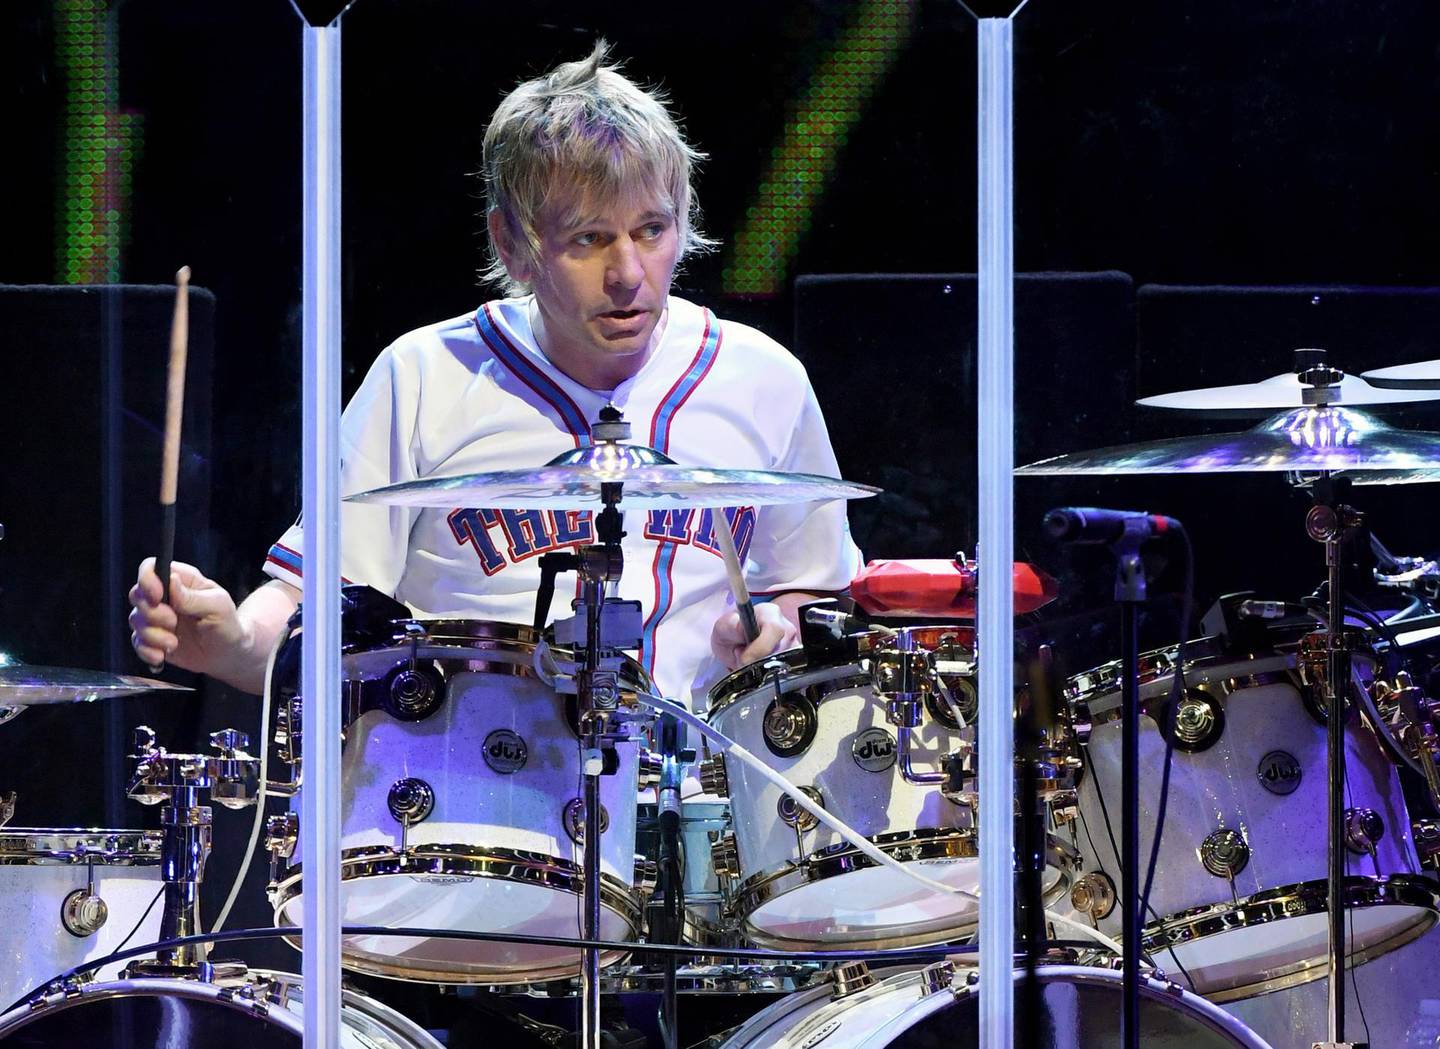 LAS VEGAS, NV - JULY 29: Touring drummer Zak Starkey of The Who performs on the first night of the band's residency at The Colosseum at Caesars Palace on July 29, 2017 in Las Vegas, Nevada.   Ethan Miller/Getty Images/AFP